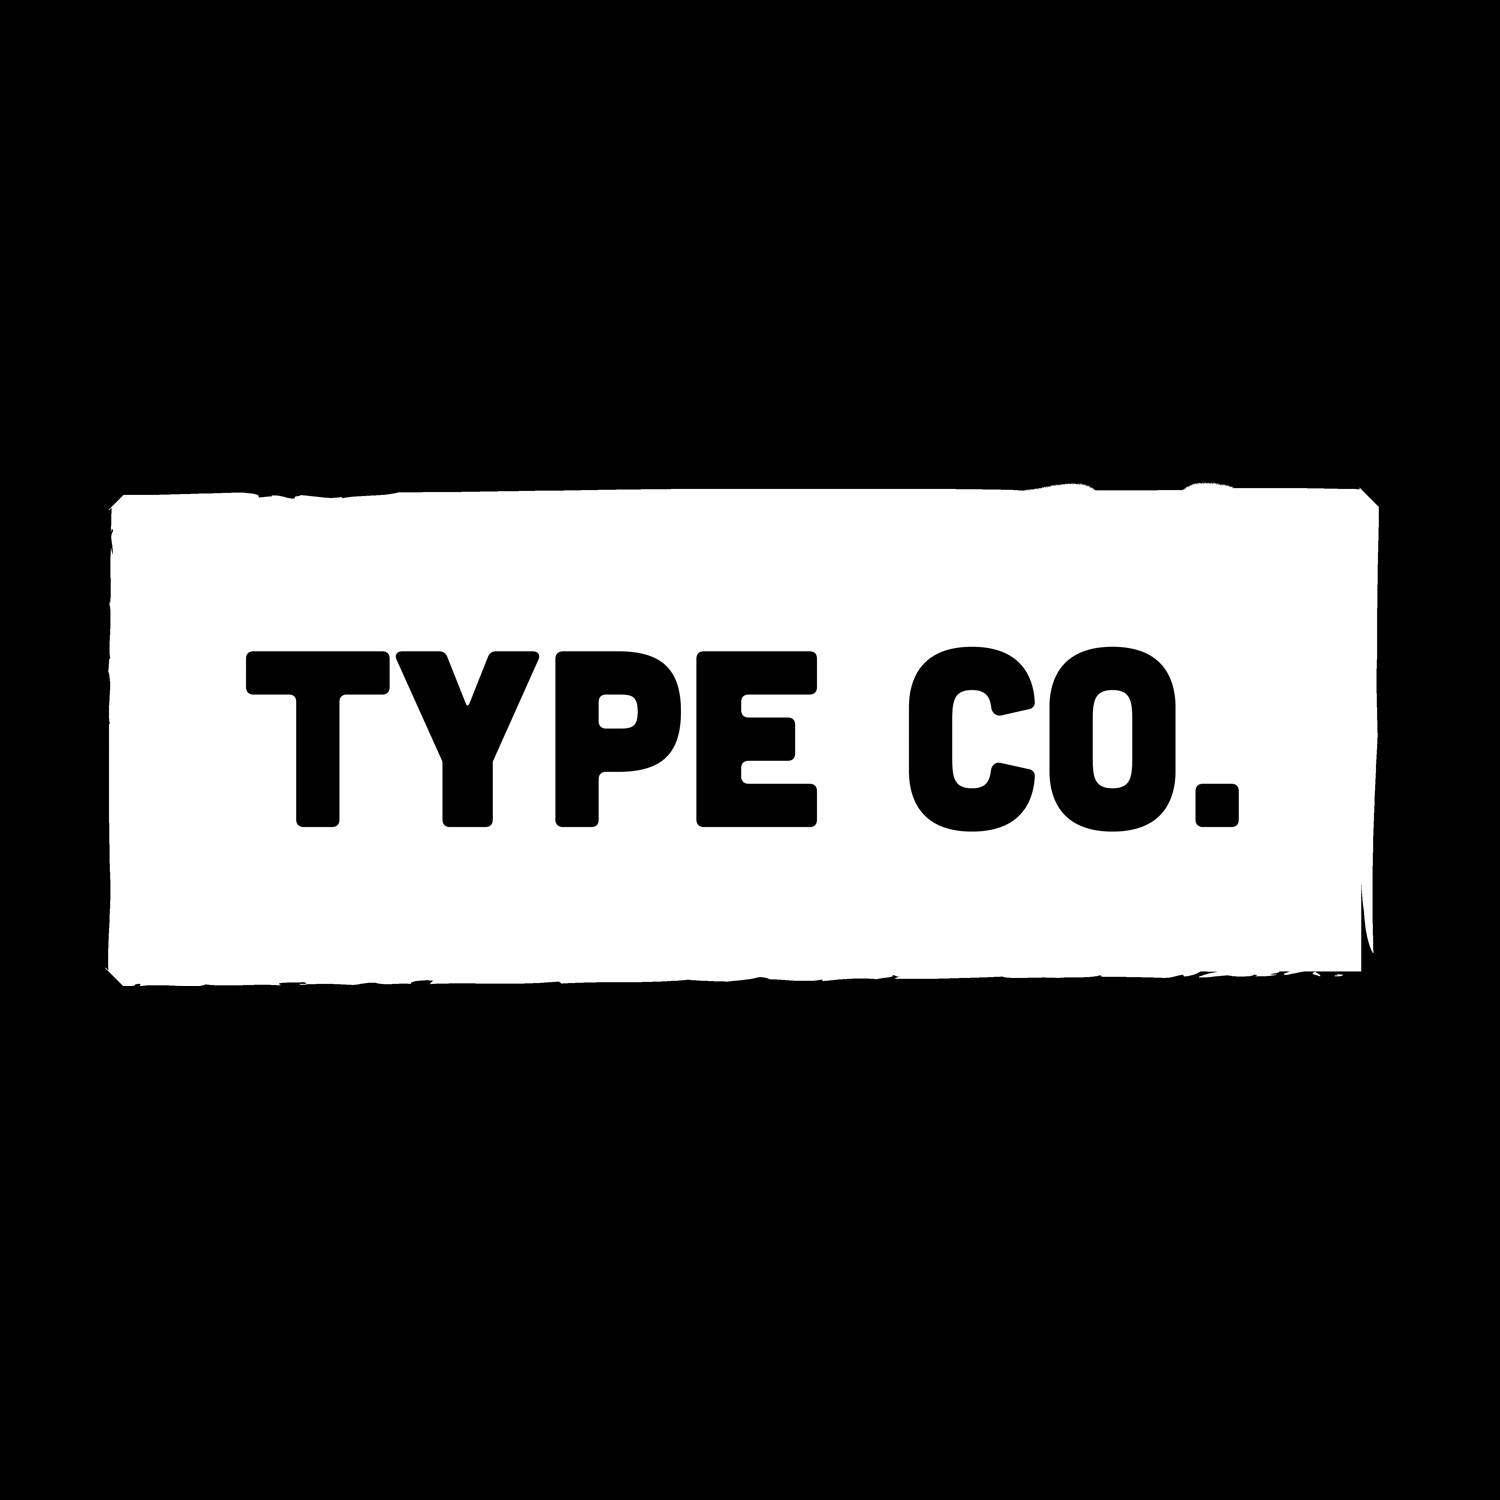 #TypeCoBestSaleEver is here!! All Shirts at 299php each! Shop now at https://t.co/ZqAh1SfrwT 😁😁